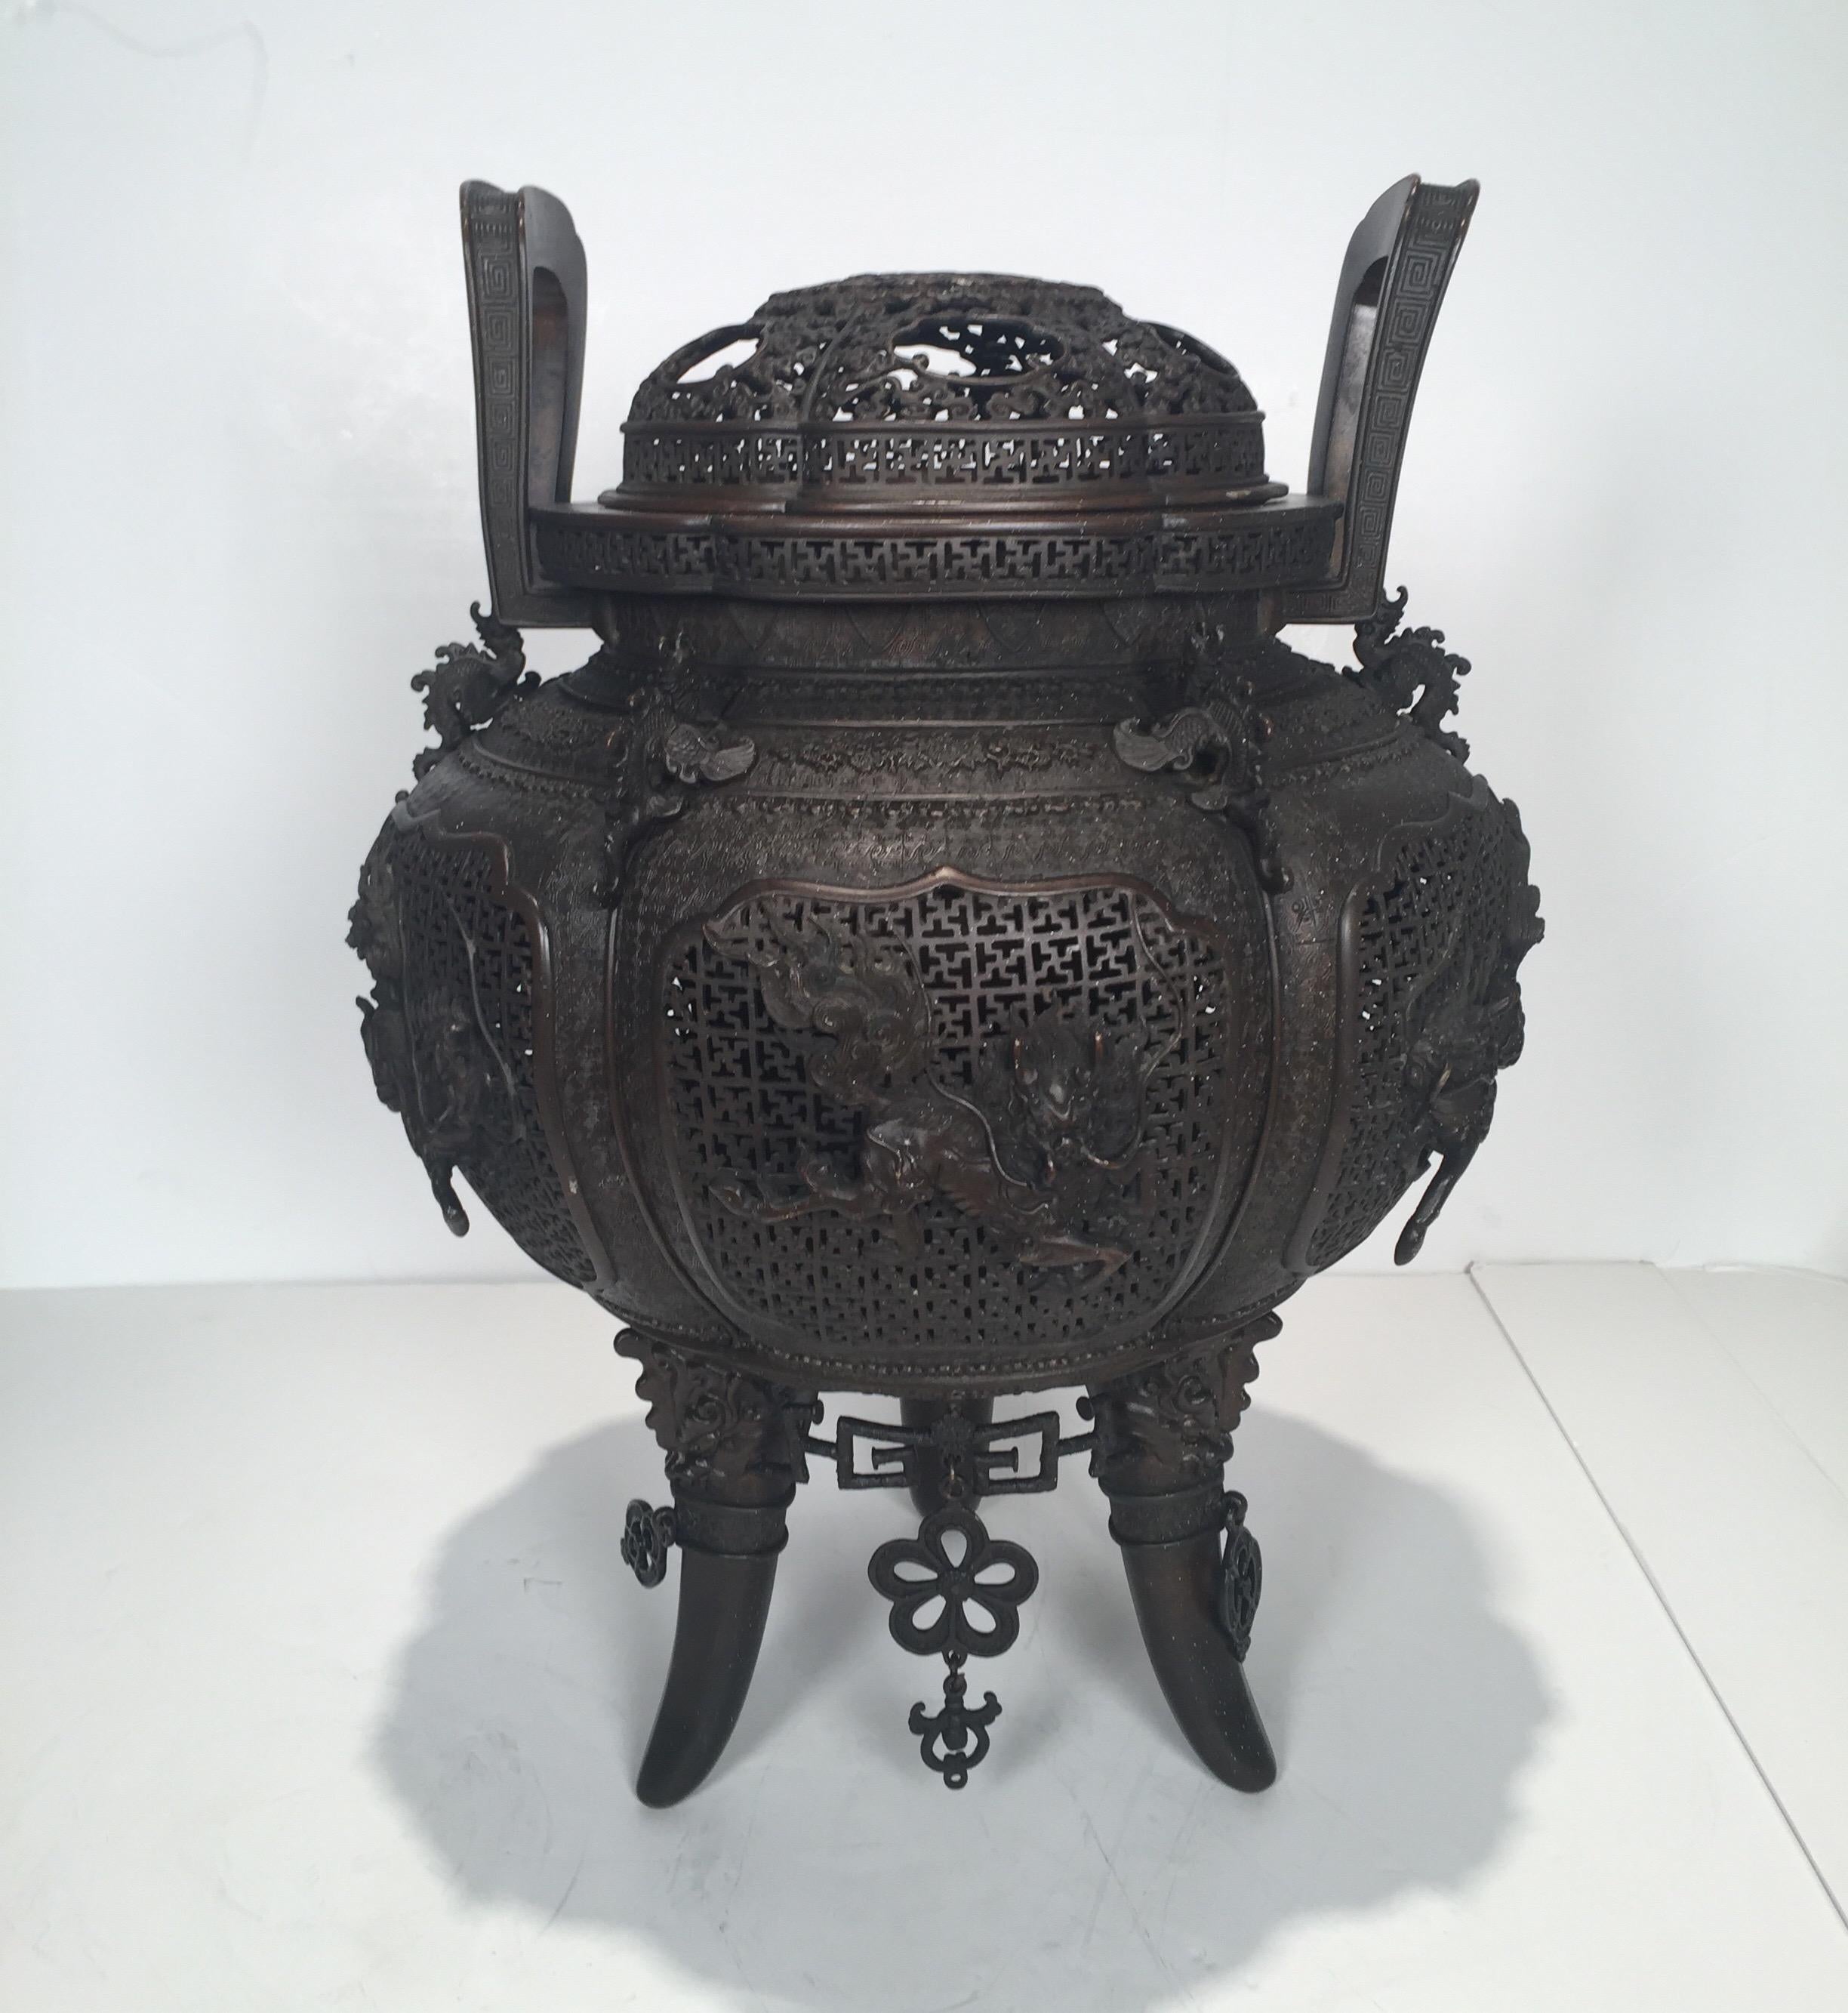 Large Japanese bronze cencer with finely pierced body and lid. The detailed reticulated body with two handles, one handle slightly bent. The bottom with hanging lover ornaments, there are 2 missing ornaments. The finish in the original dark rich